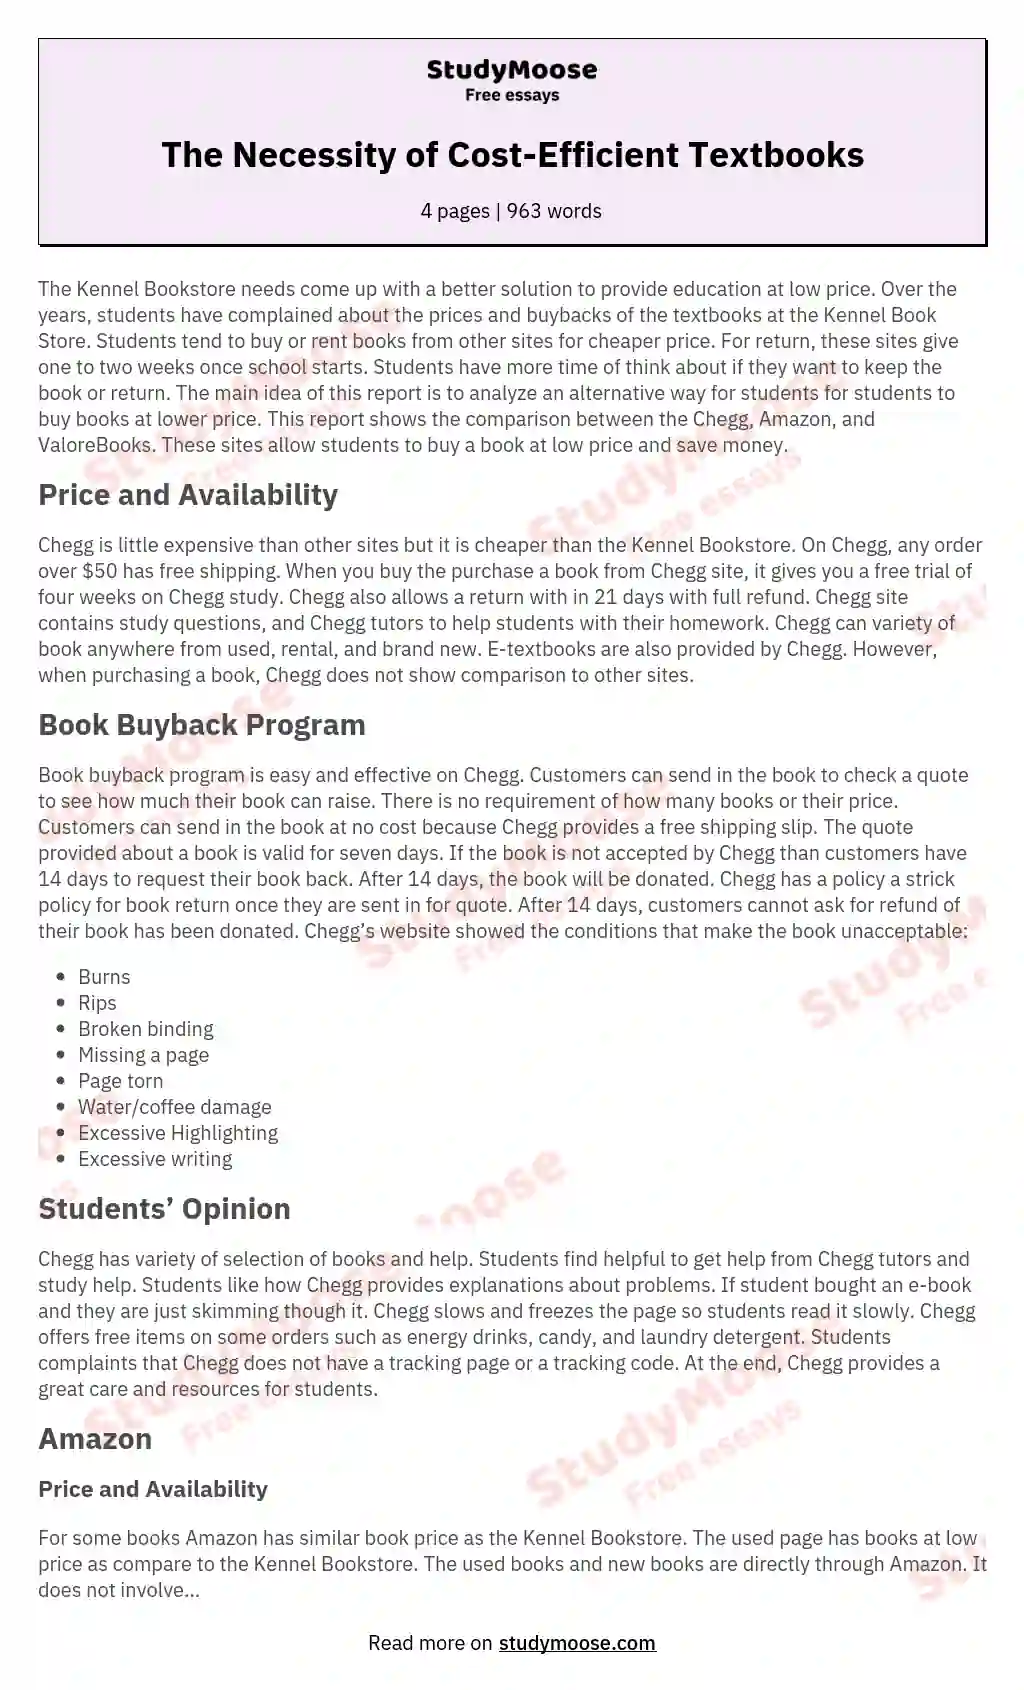 The Necessity of Cost-Efficient Textbooks essay